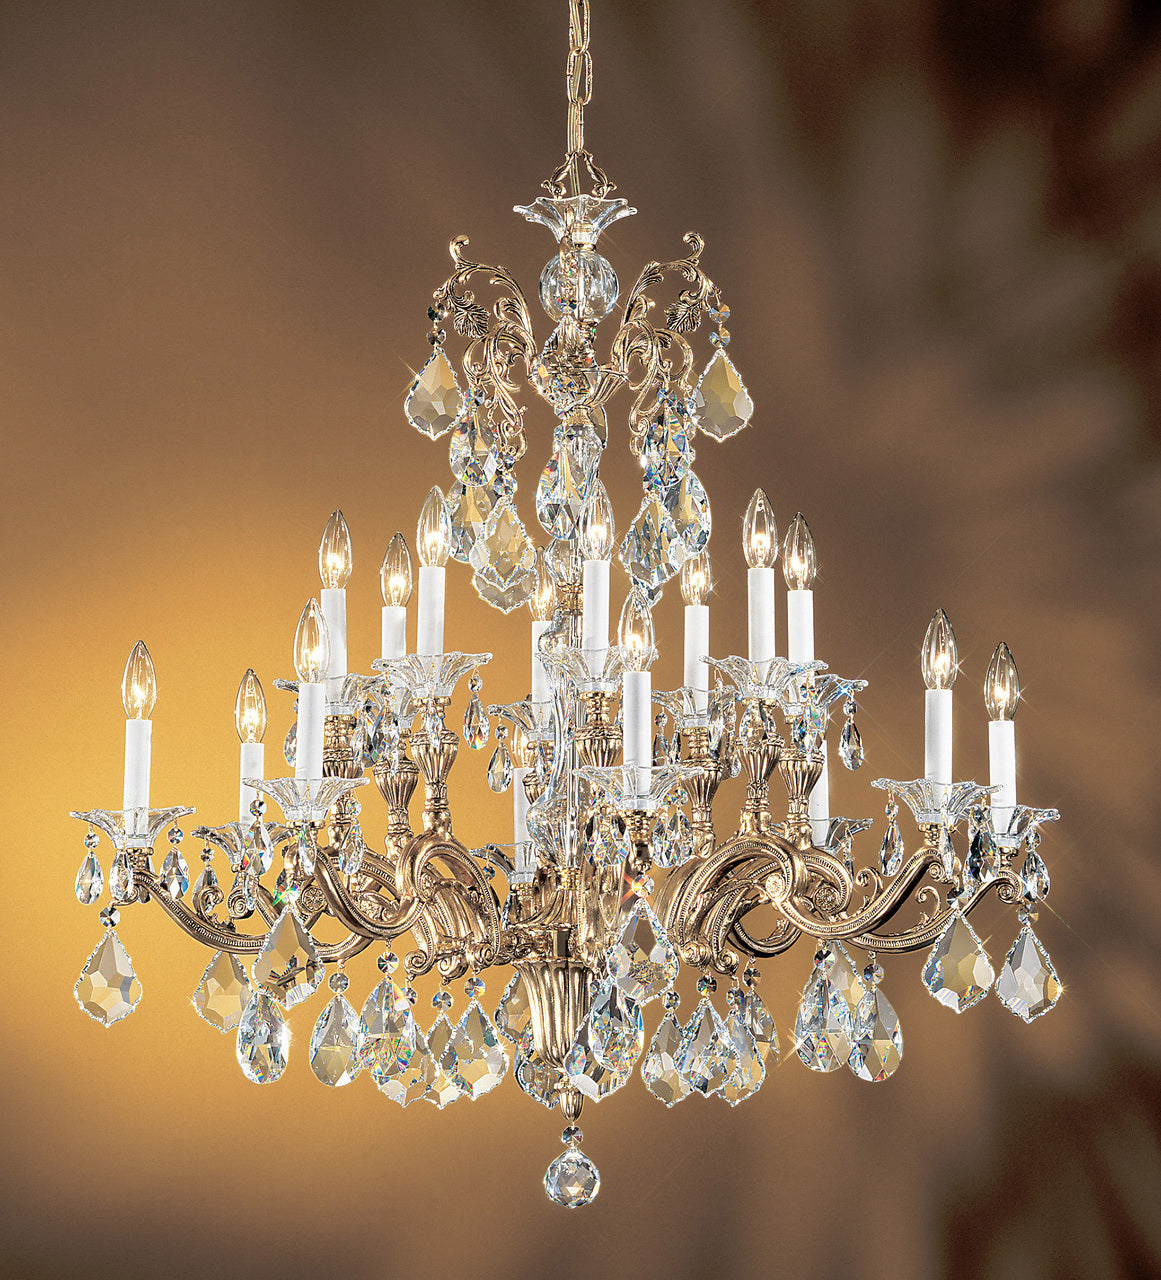 Classic Lighting 57116 BBK SGT Via Firenze Crystal Chandelier in Bronze/Black Patina (Imported from Spain)